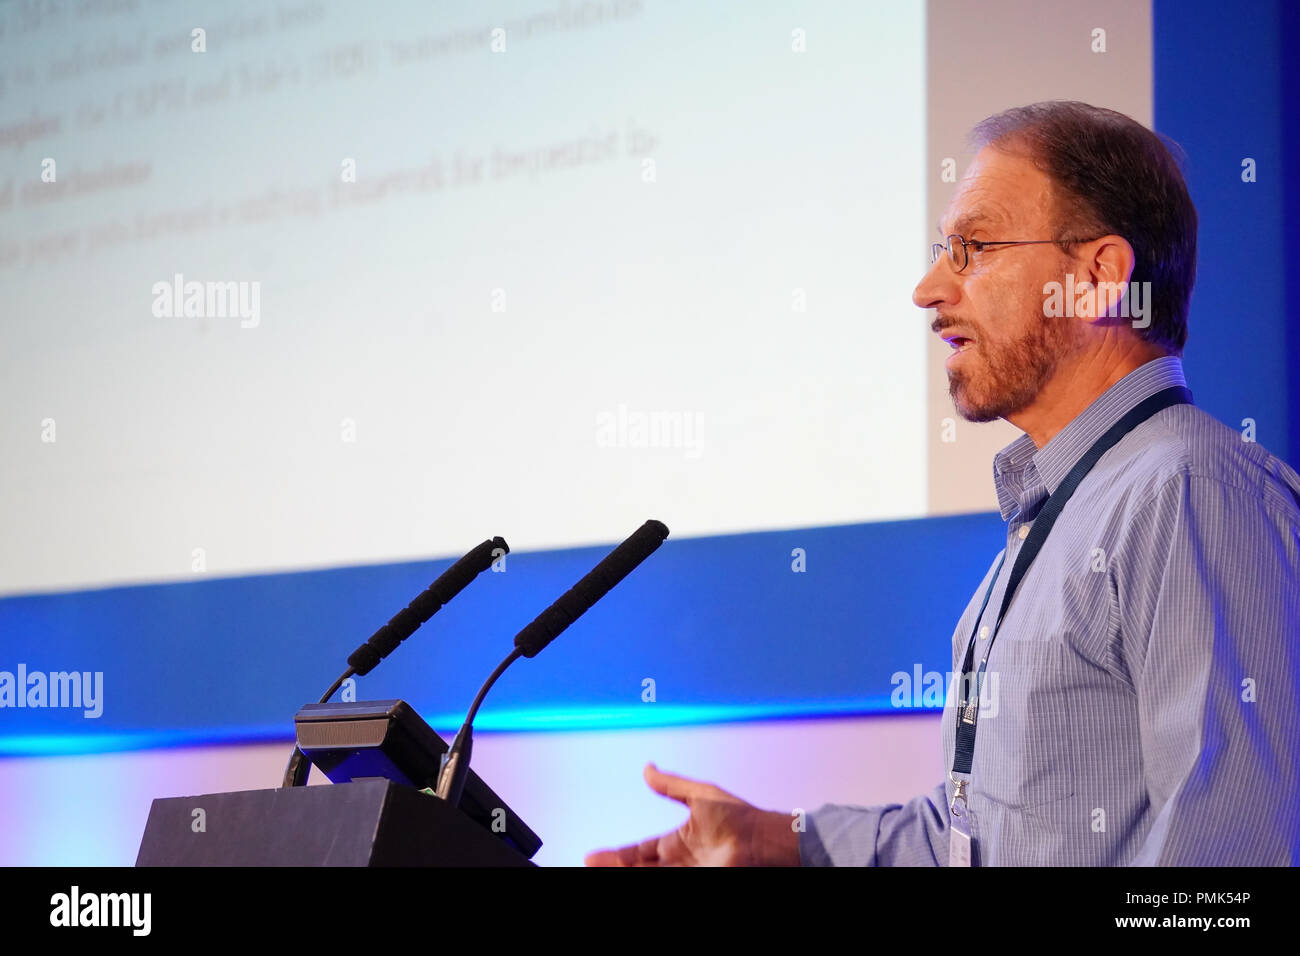 Aris Spanos speaking at the 2018 Conference of the Royal Statistical Society in Cardiff City Hall. Photo date: Wednesday, September 5, 2018. Photo: Ro Stock Photo